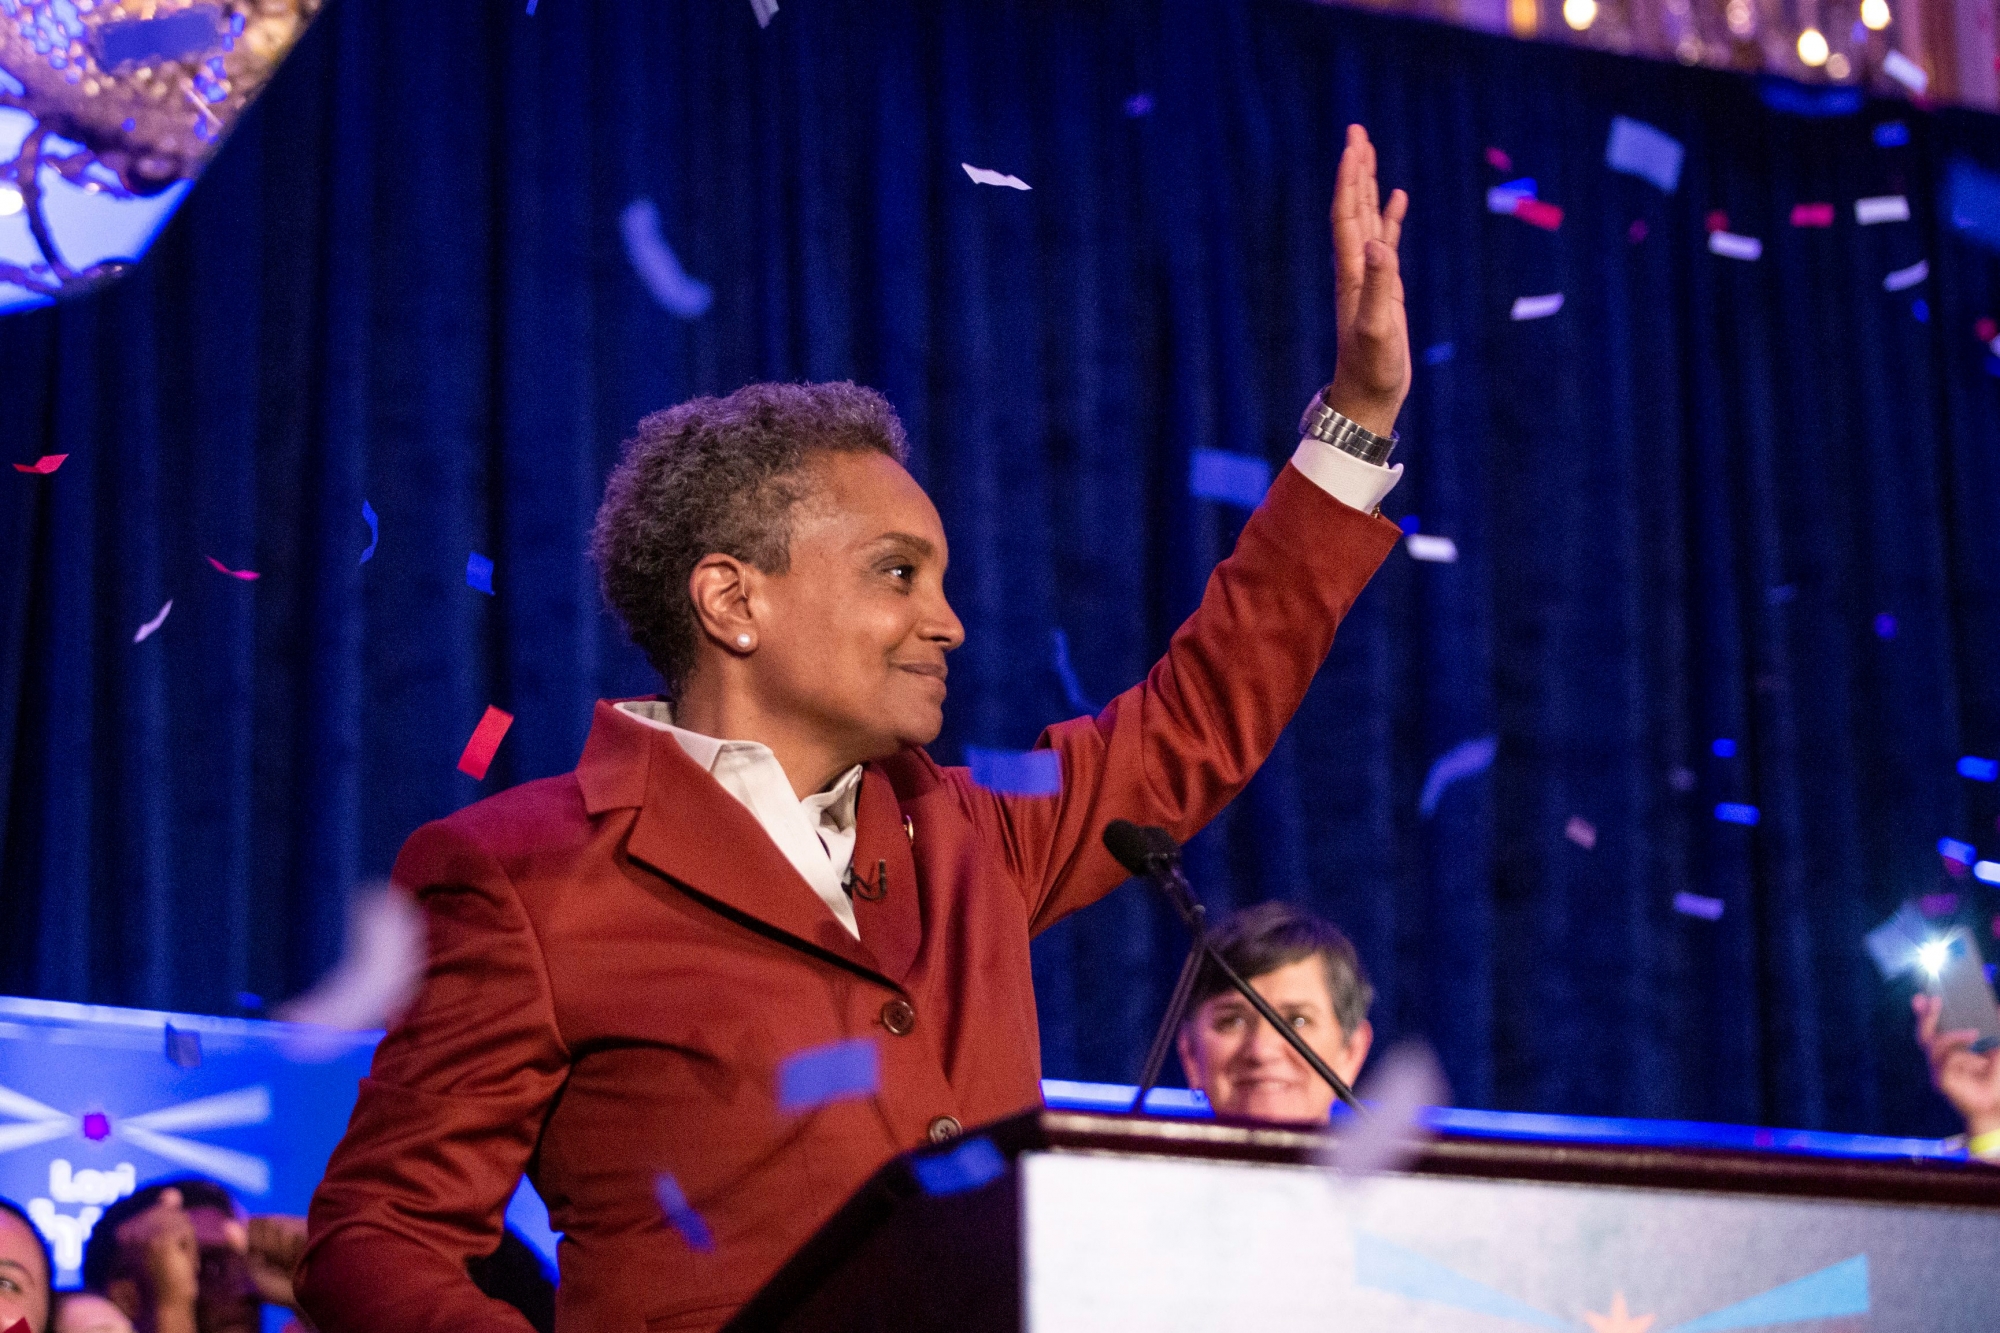 Lori Lightfoot celebrates at her election night rally at the Hilton Chicago after defeating Toni Preckwinkle in the Chicago mayoral election, Tuesday, April 2, 2019. (Ashlee Rezin/Chicago Sun-Times via AP) Chicago Mayoral Election